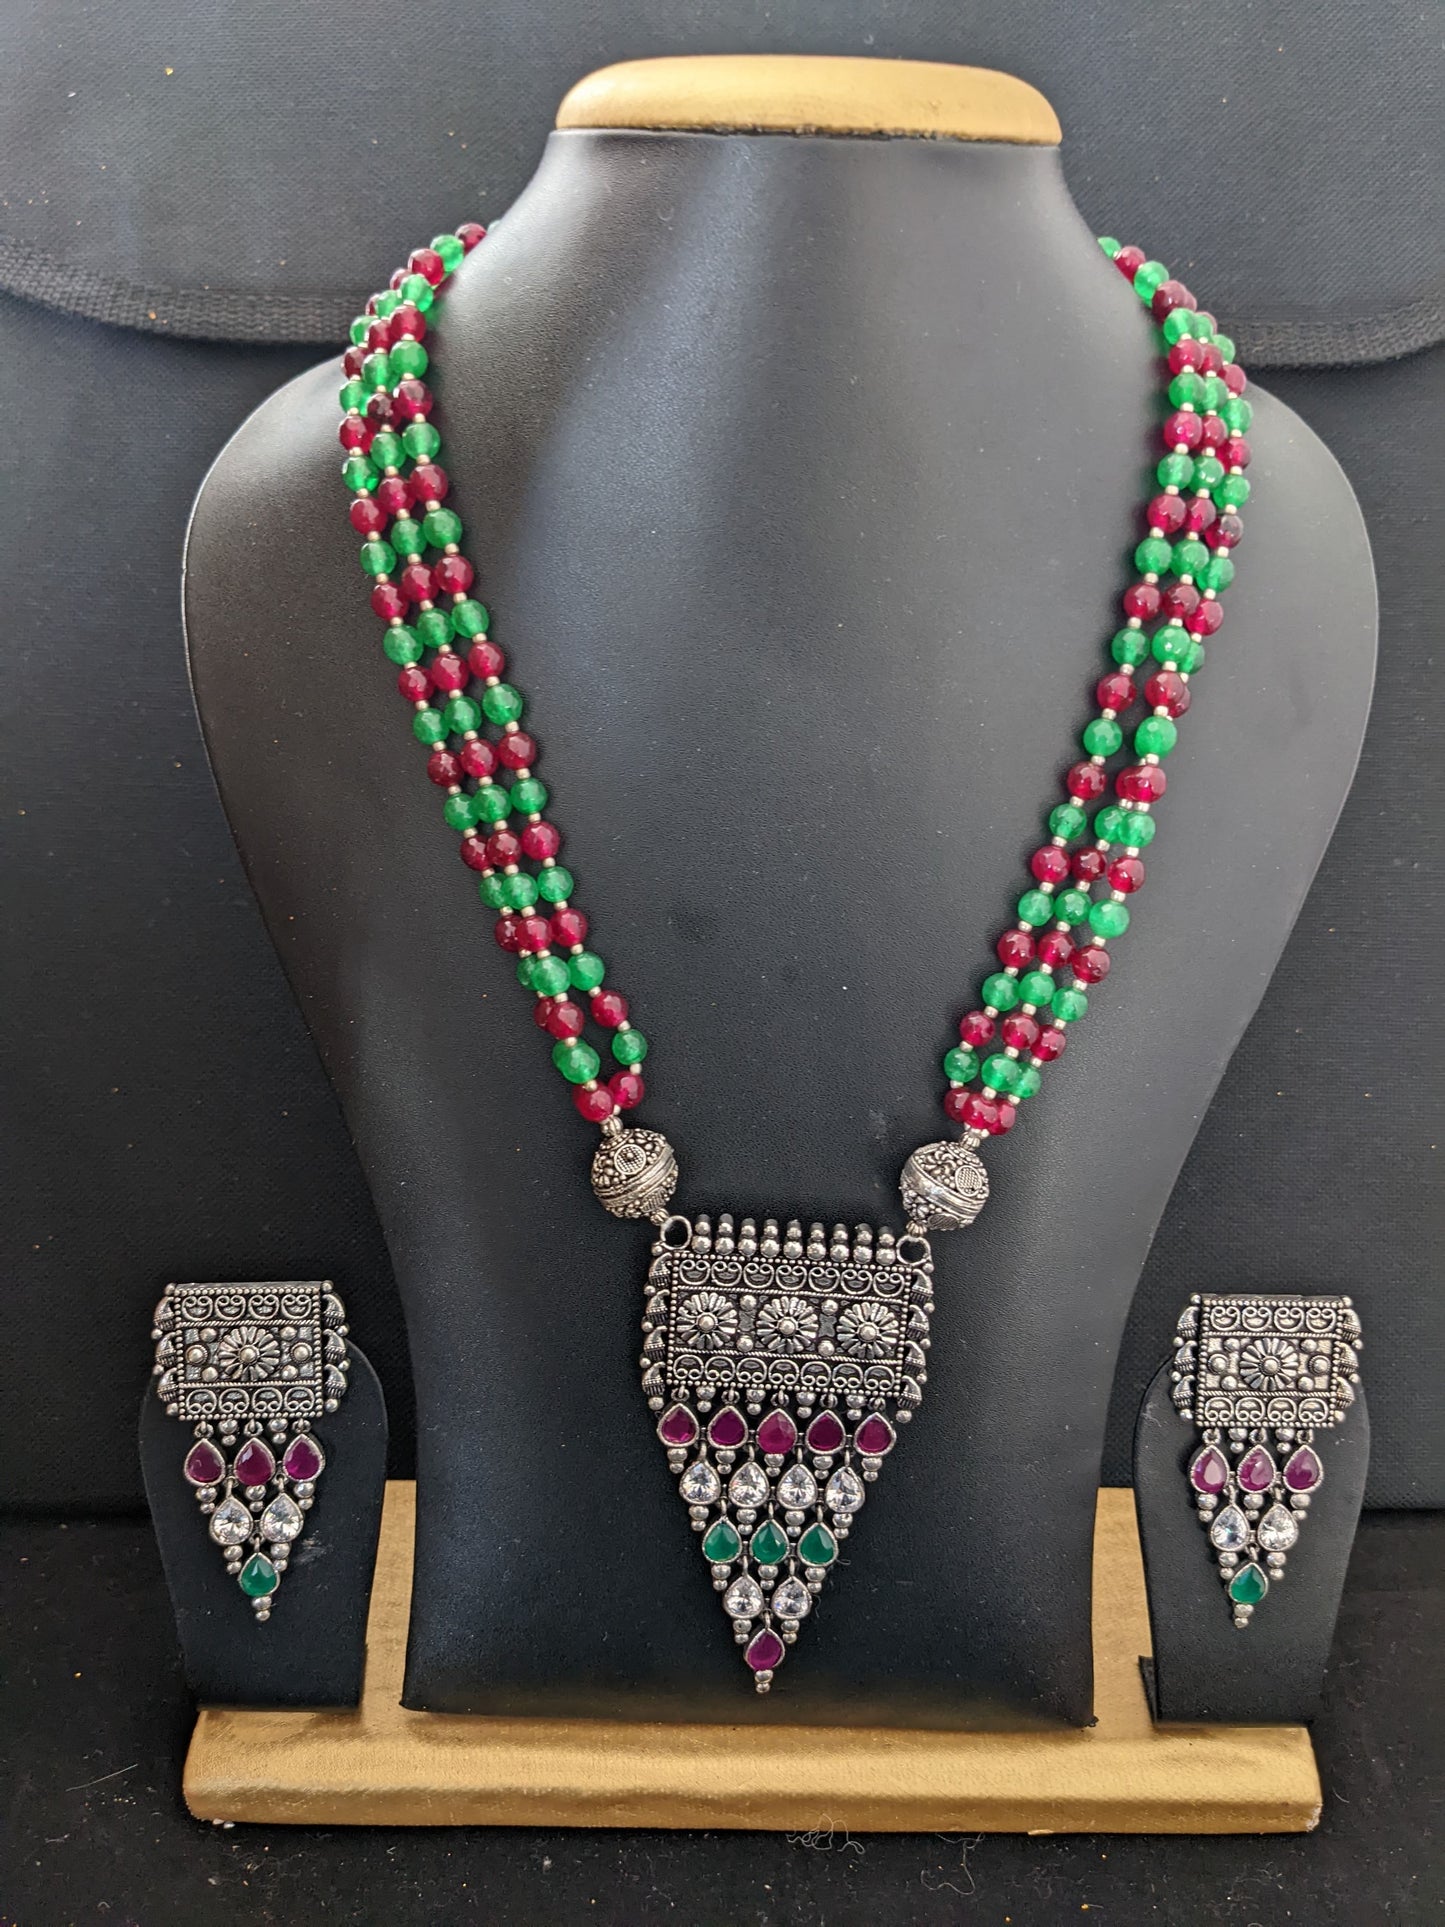 Beaded Necklace Oxidized Silver Pendant and Earrings set